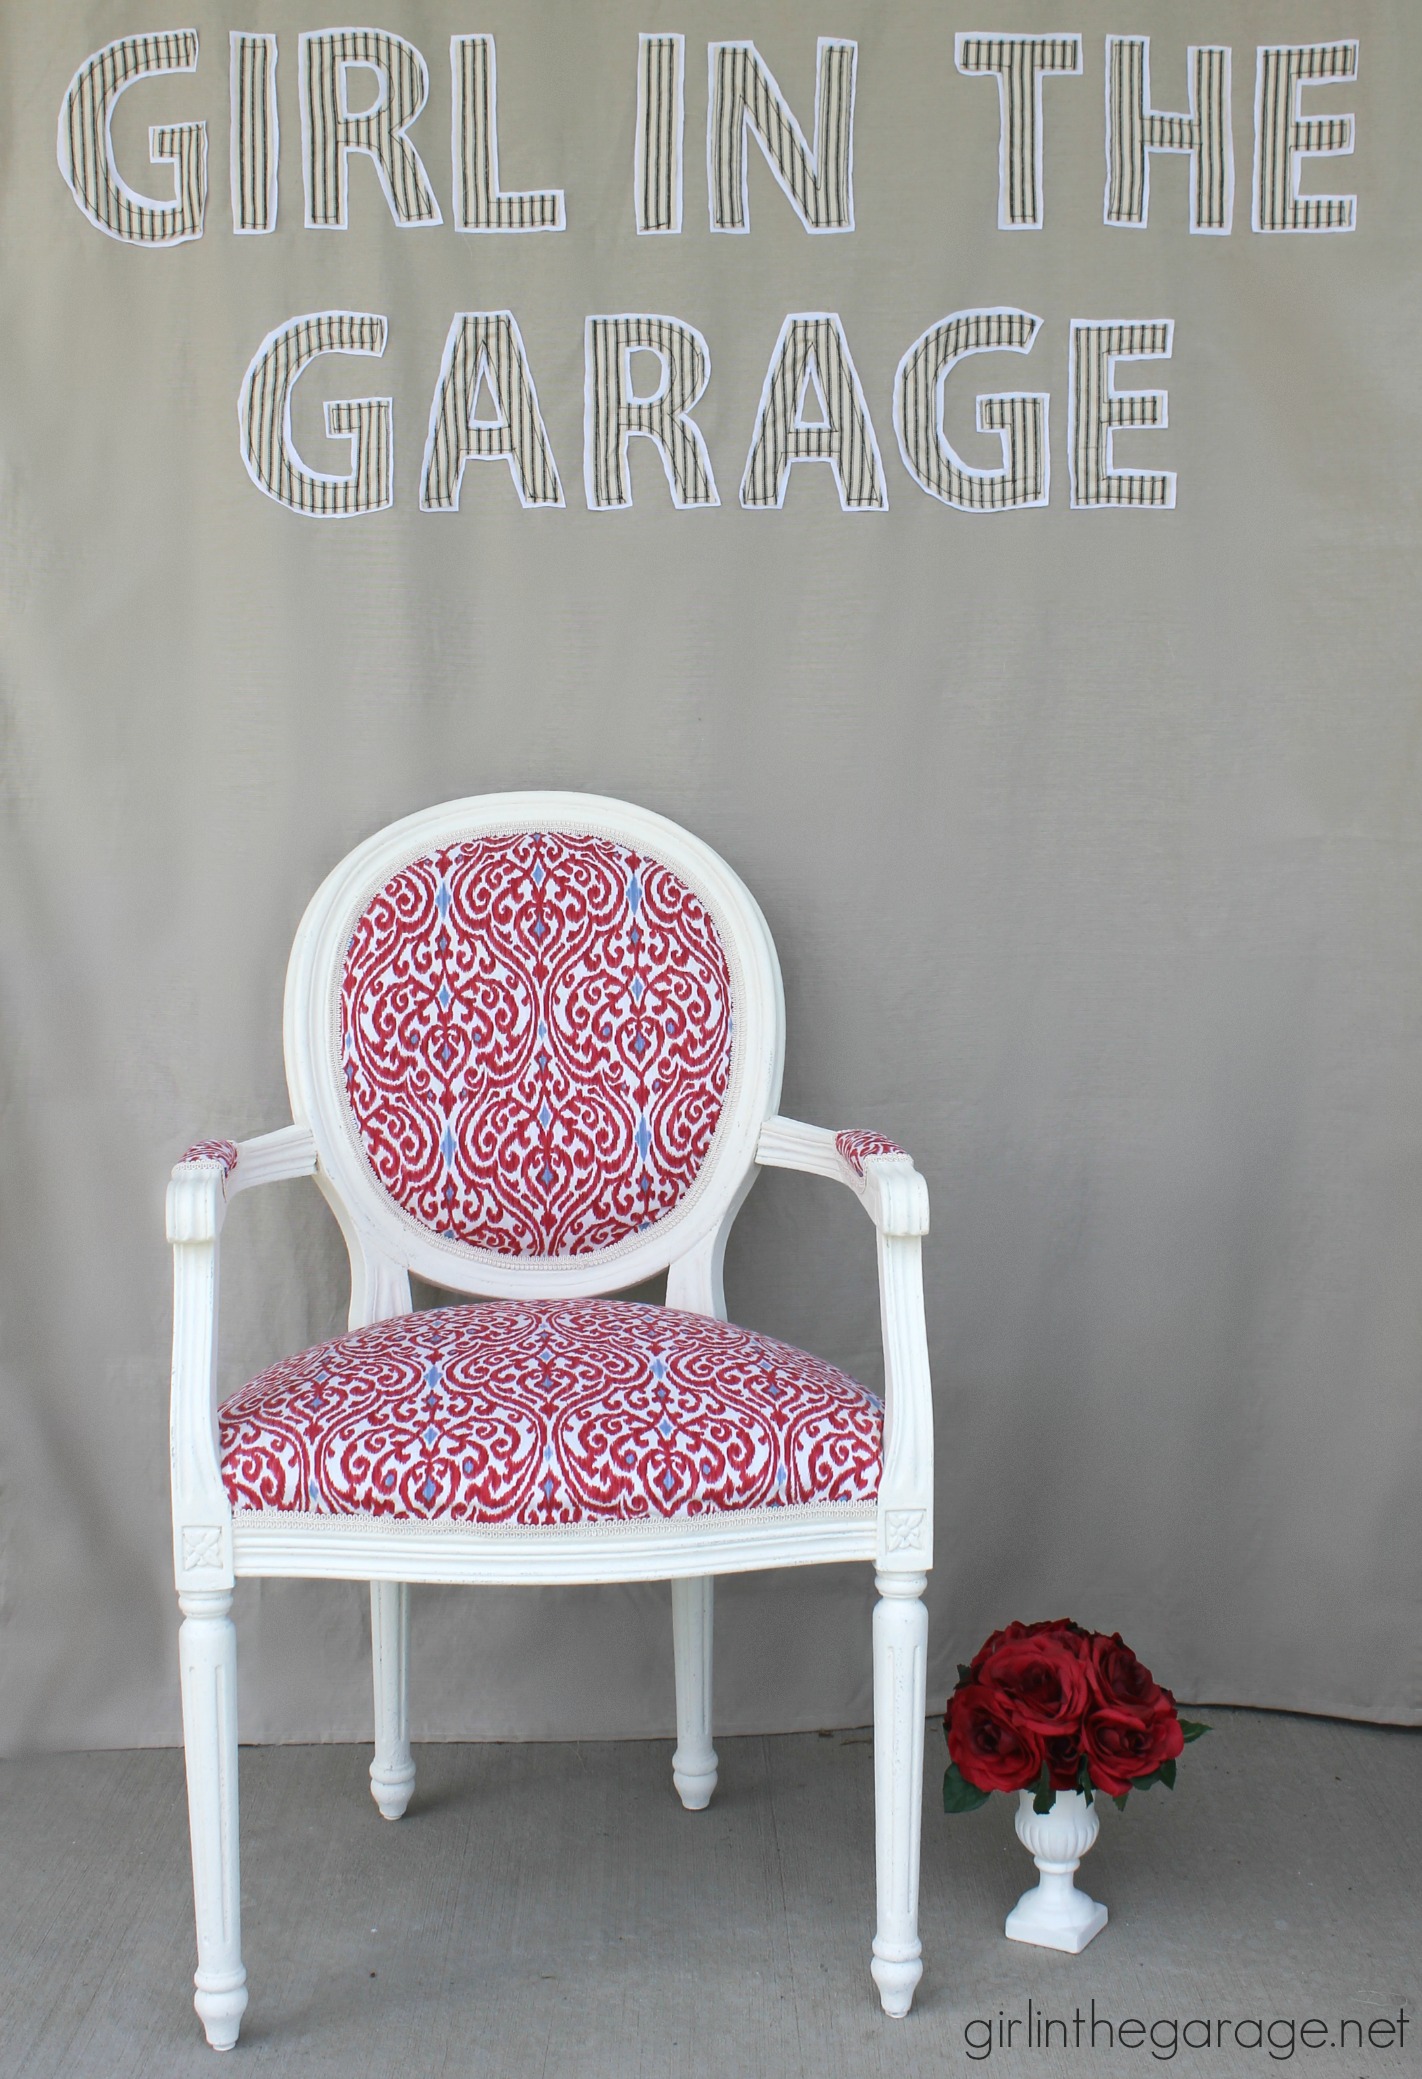 DIY Reupholstered Chair Makeover and Lessons Learned - by Girl in the Garage